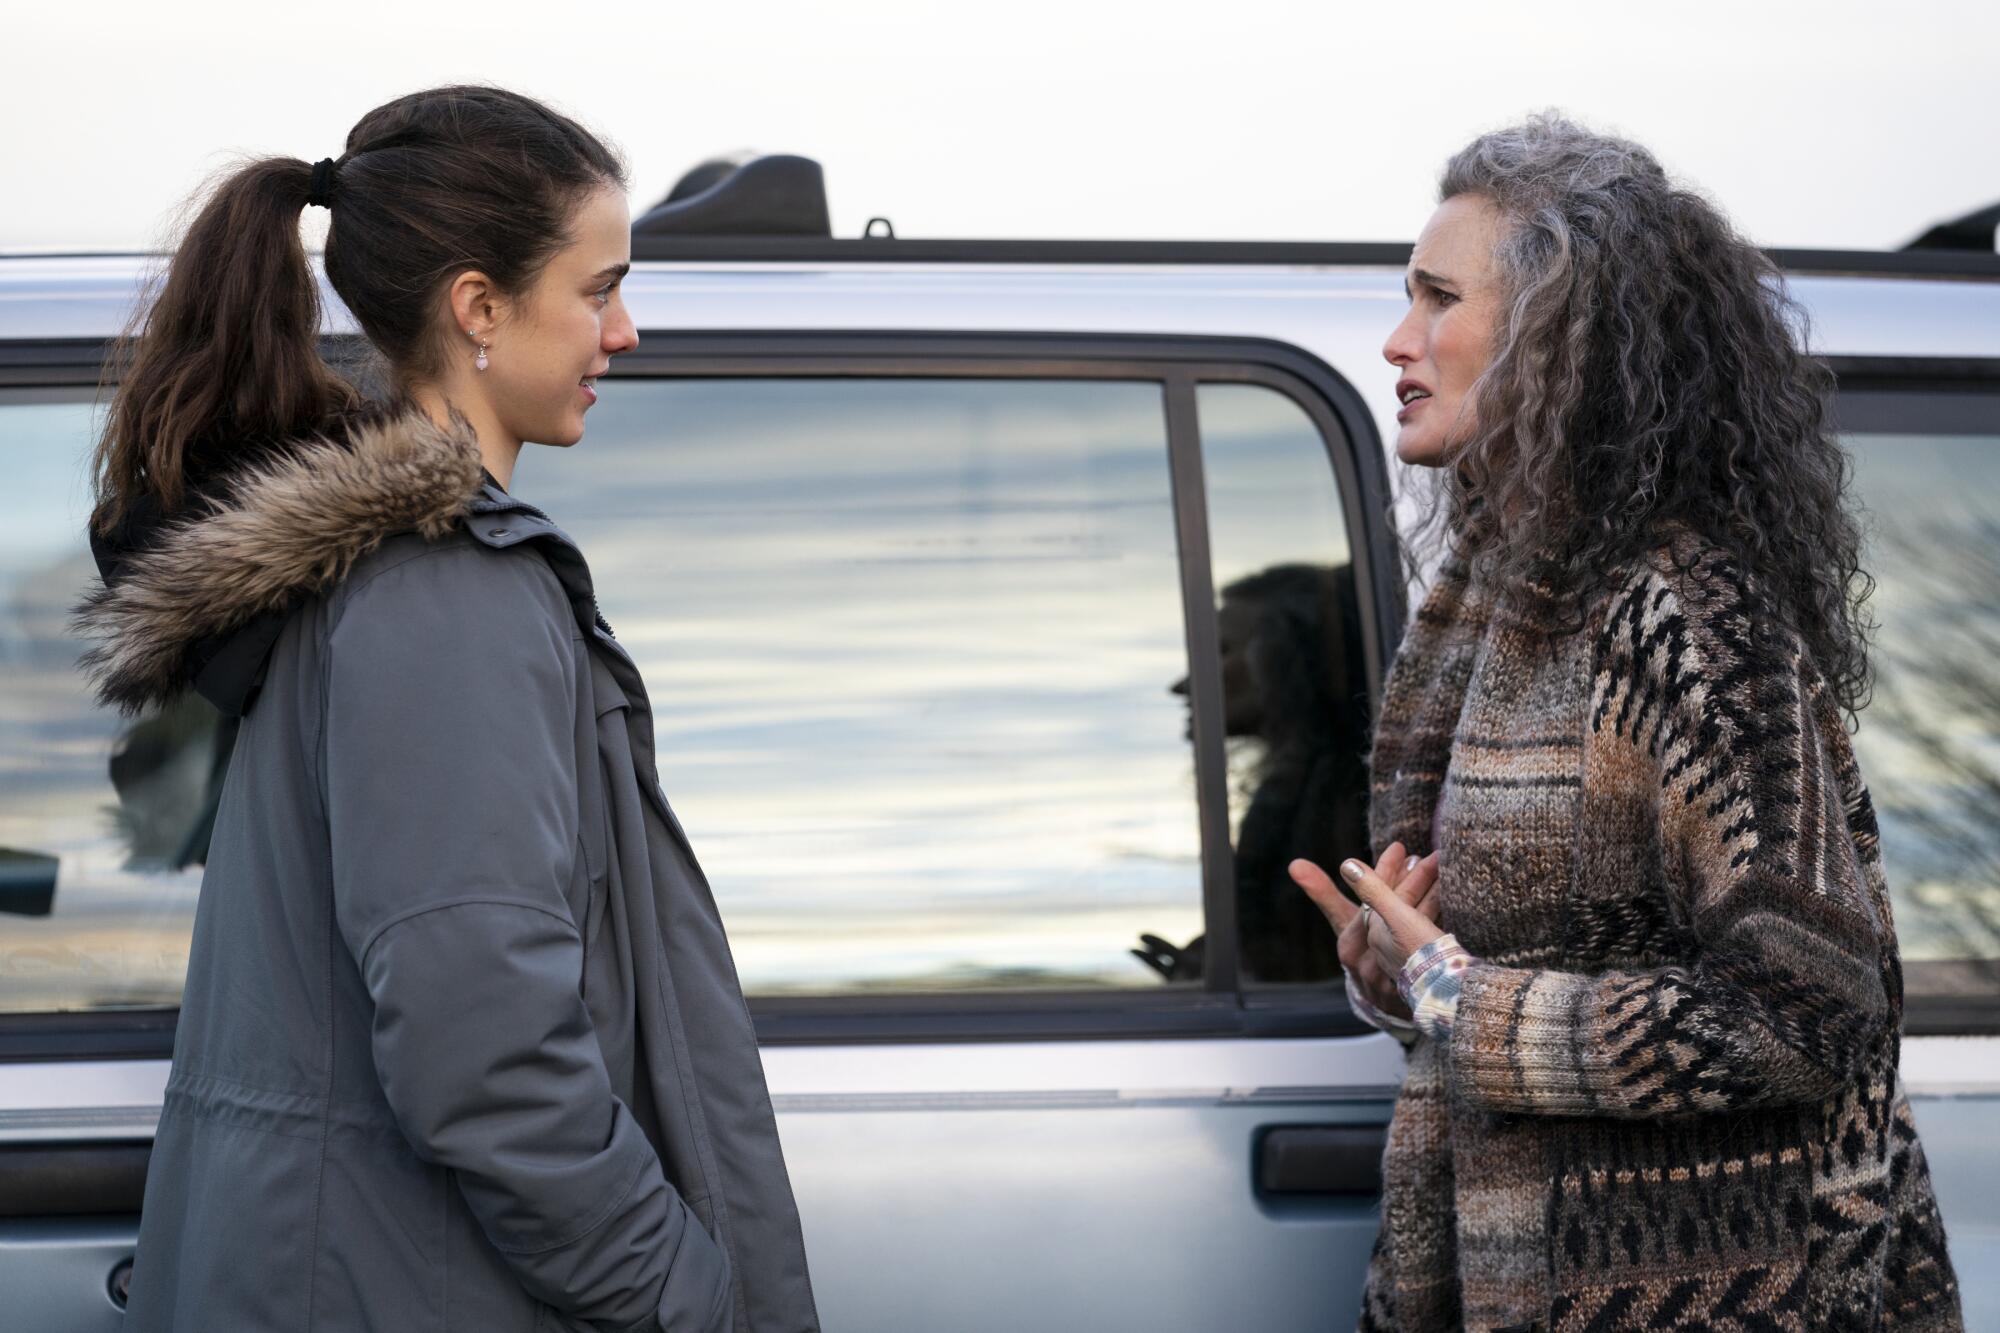 Margaret Qualley as Alex and Andie MacDowell as Paula in "Maid."